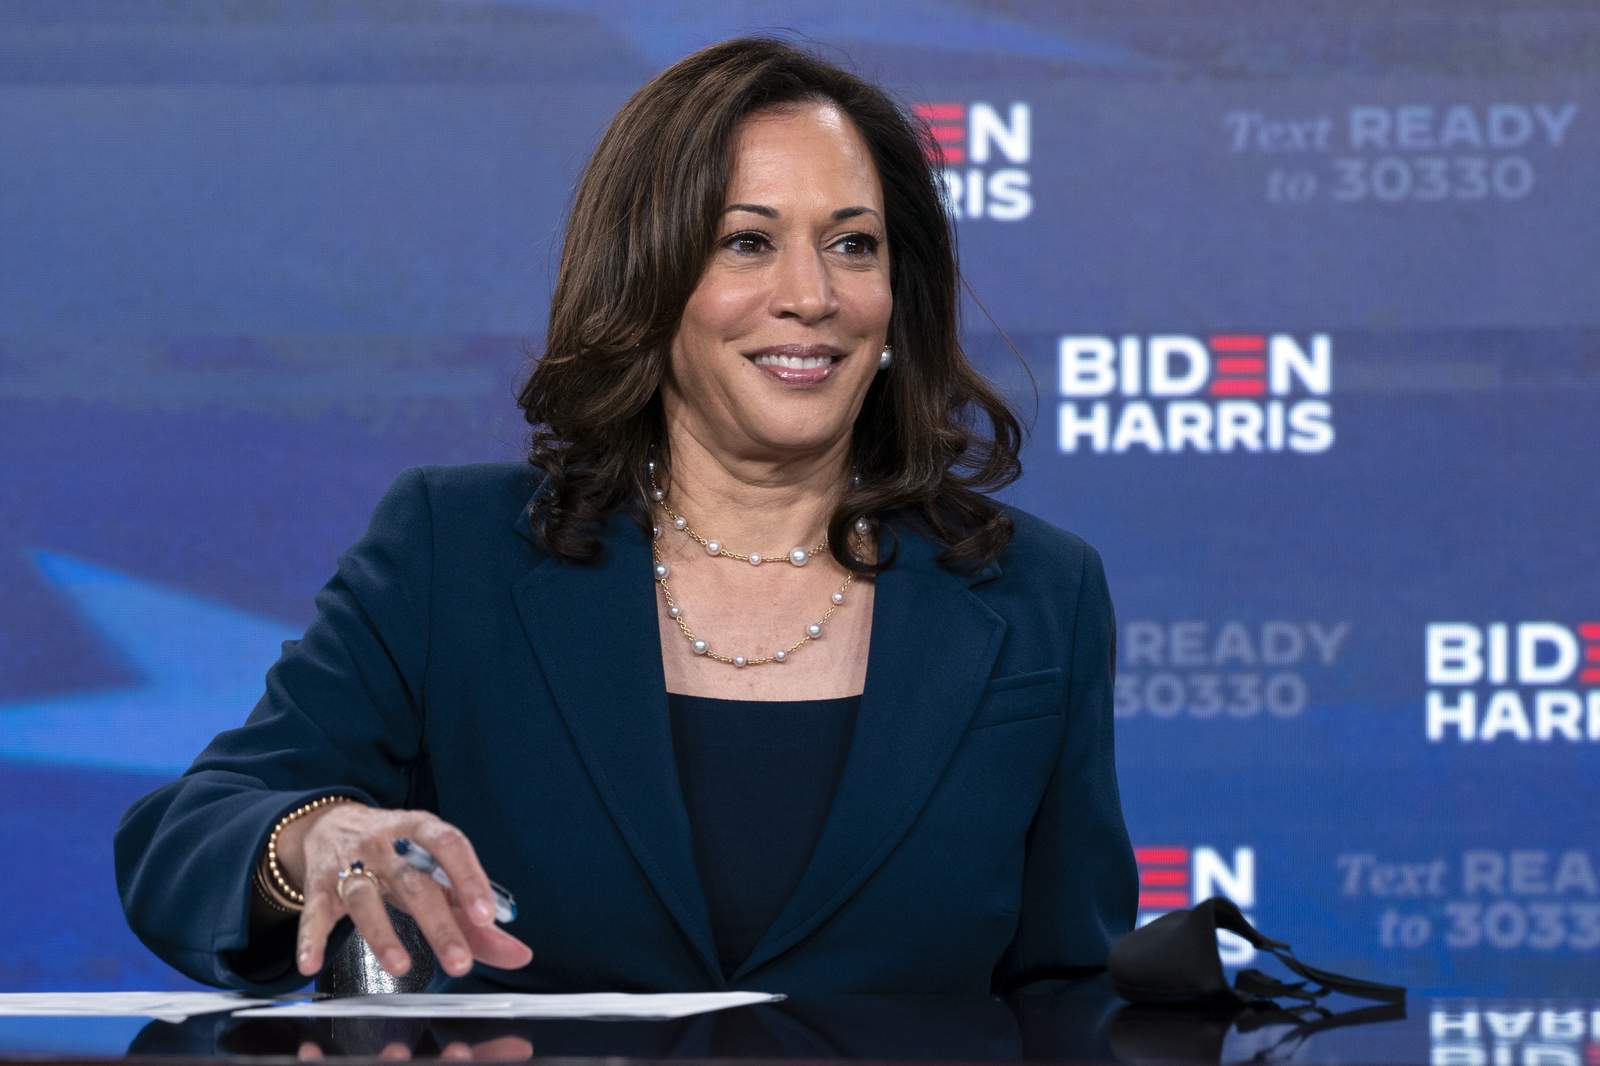 White House's Meadows says he accepts Harris eligible for VP